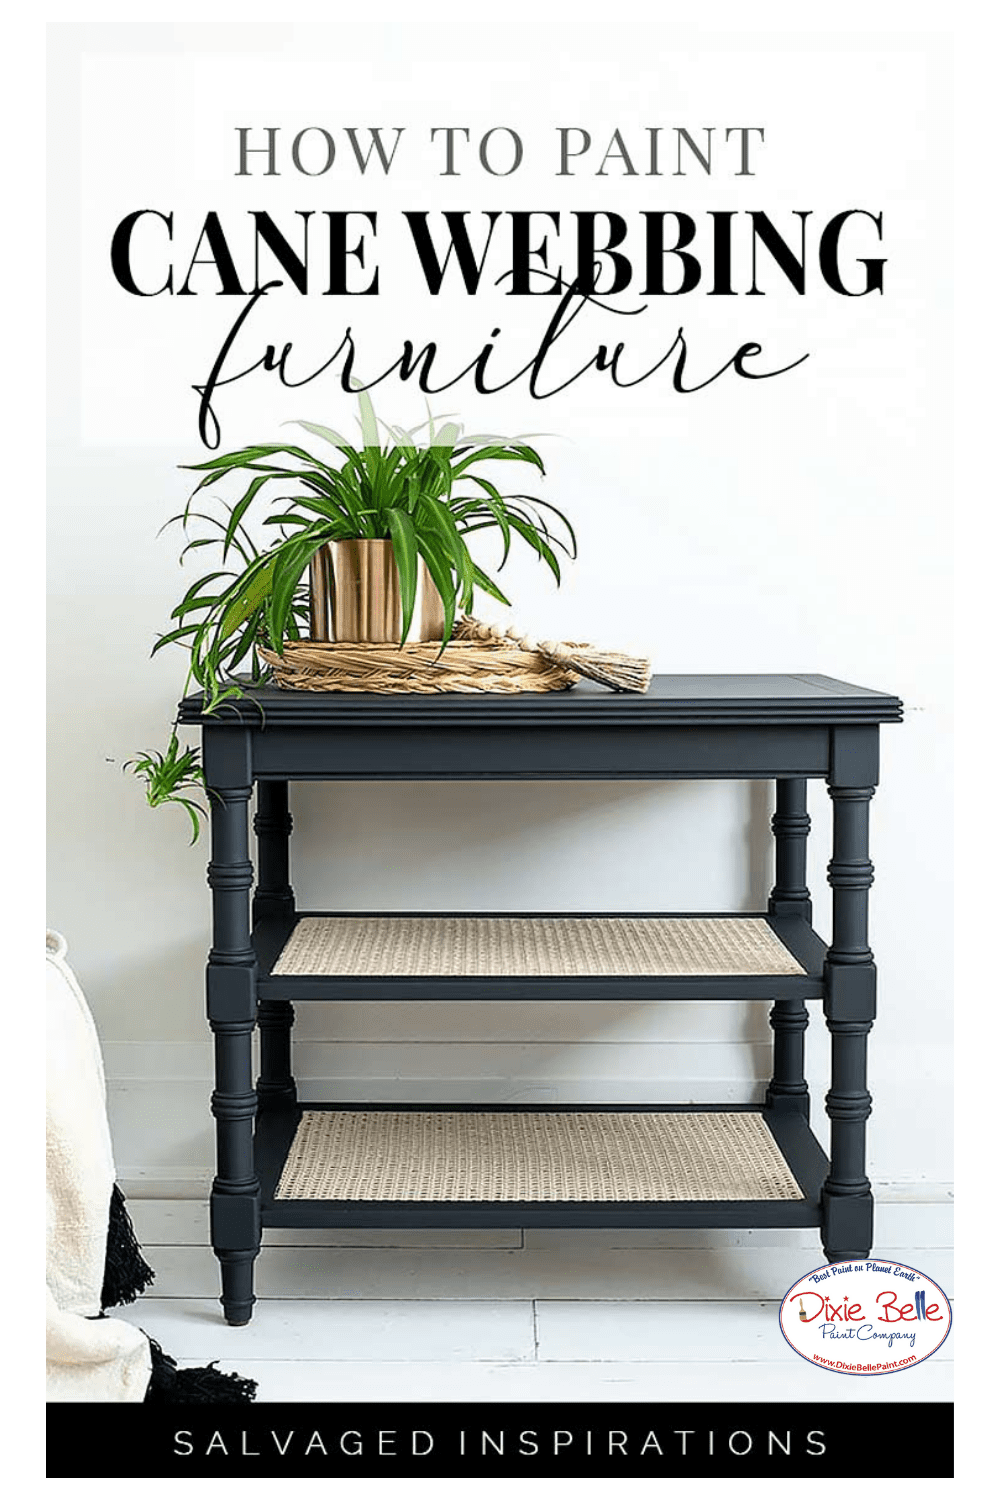 How to Paint Cane Webbing Furniture - Dixie Belle Paint Company